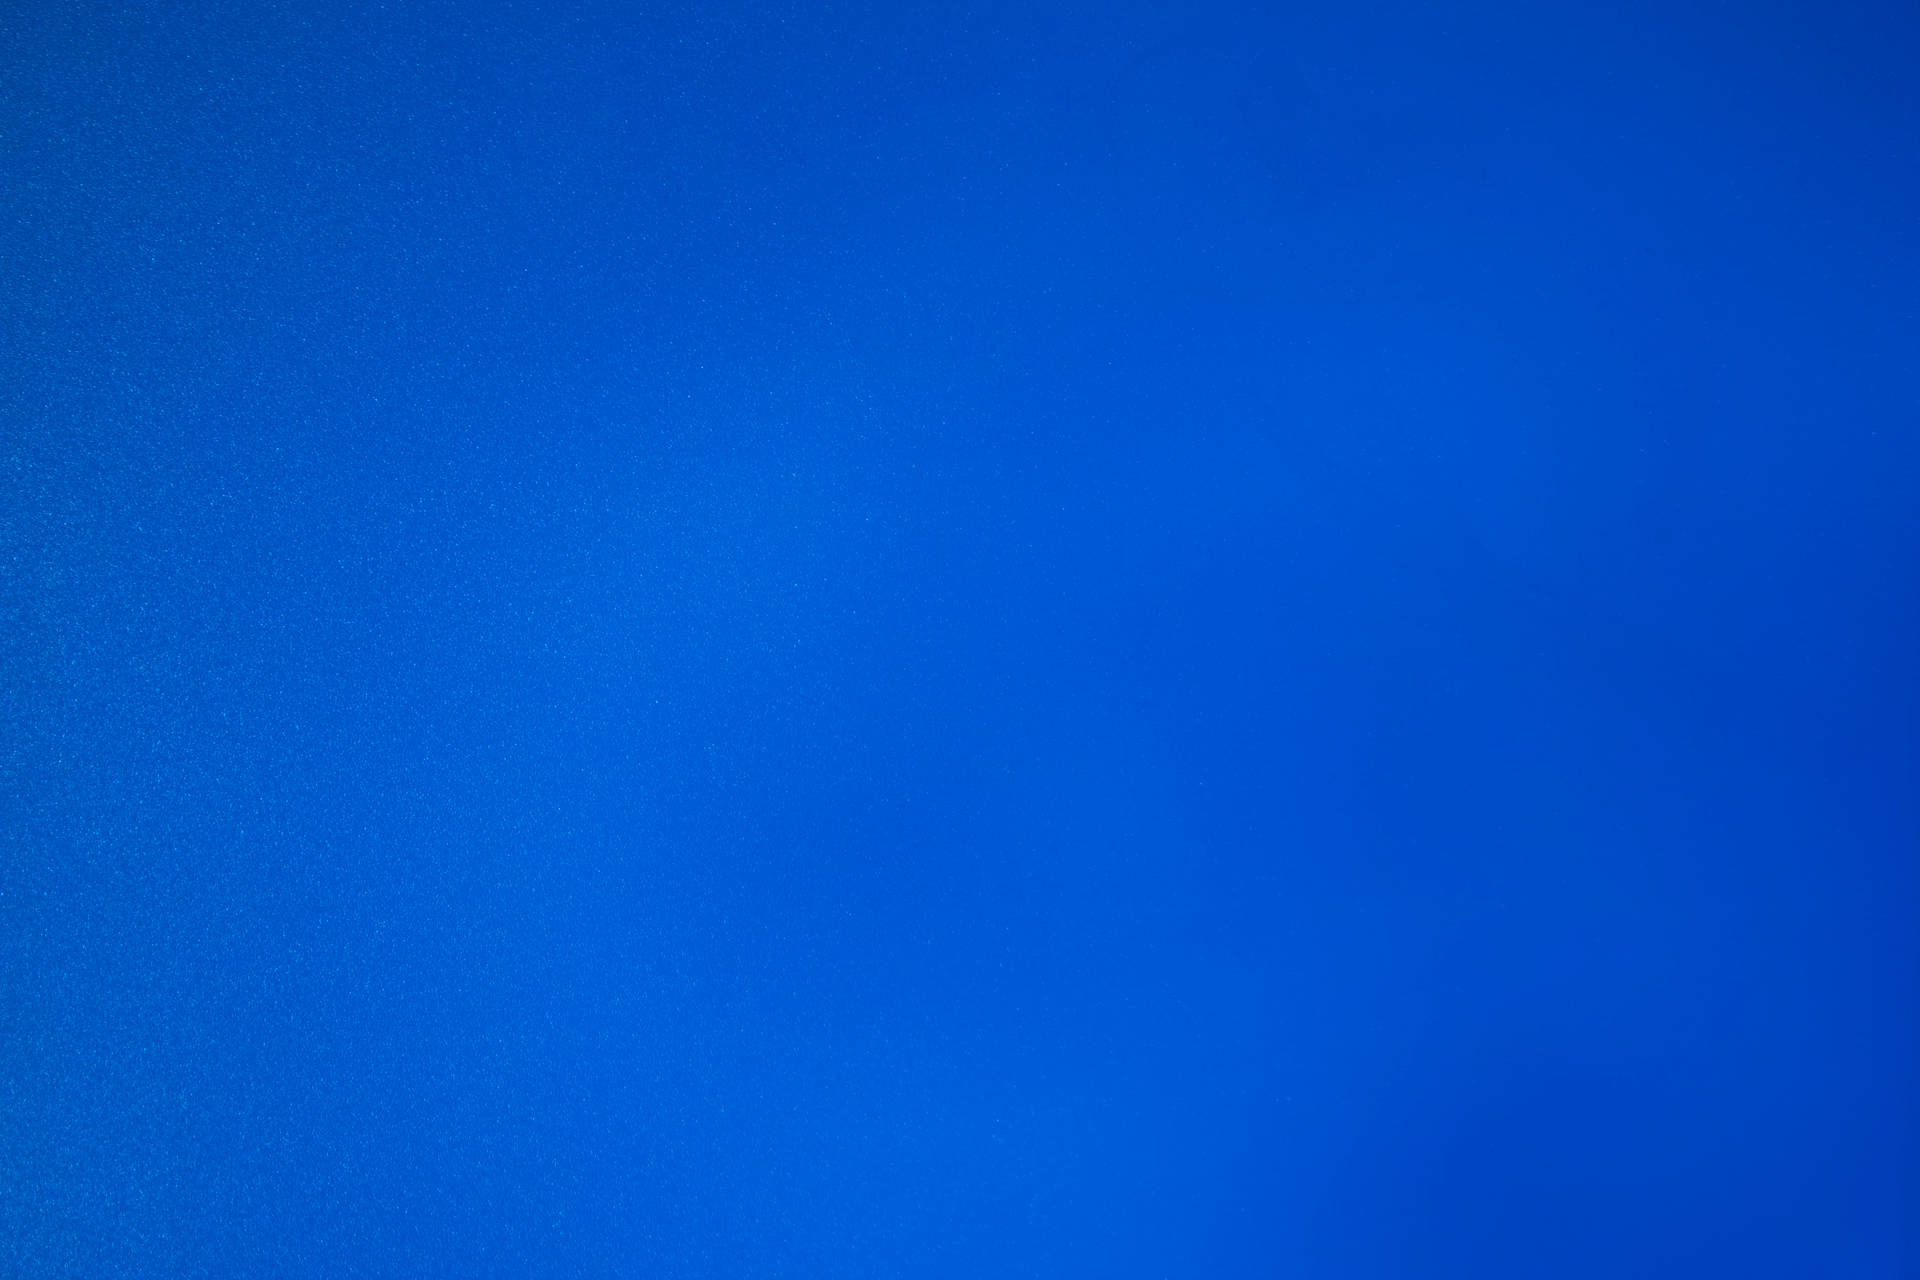 Solid Color 6000X4000 Wallpaper and Background Image